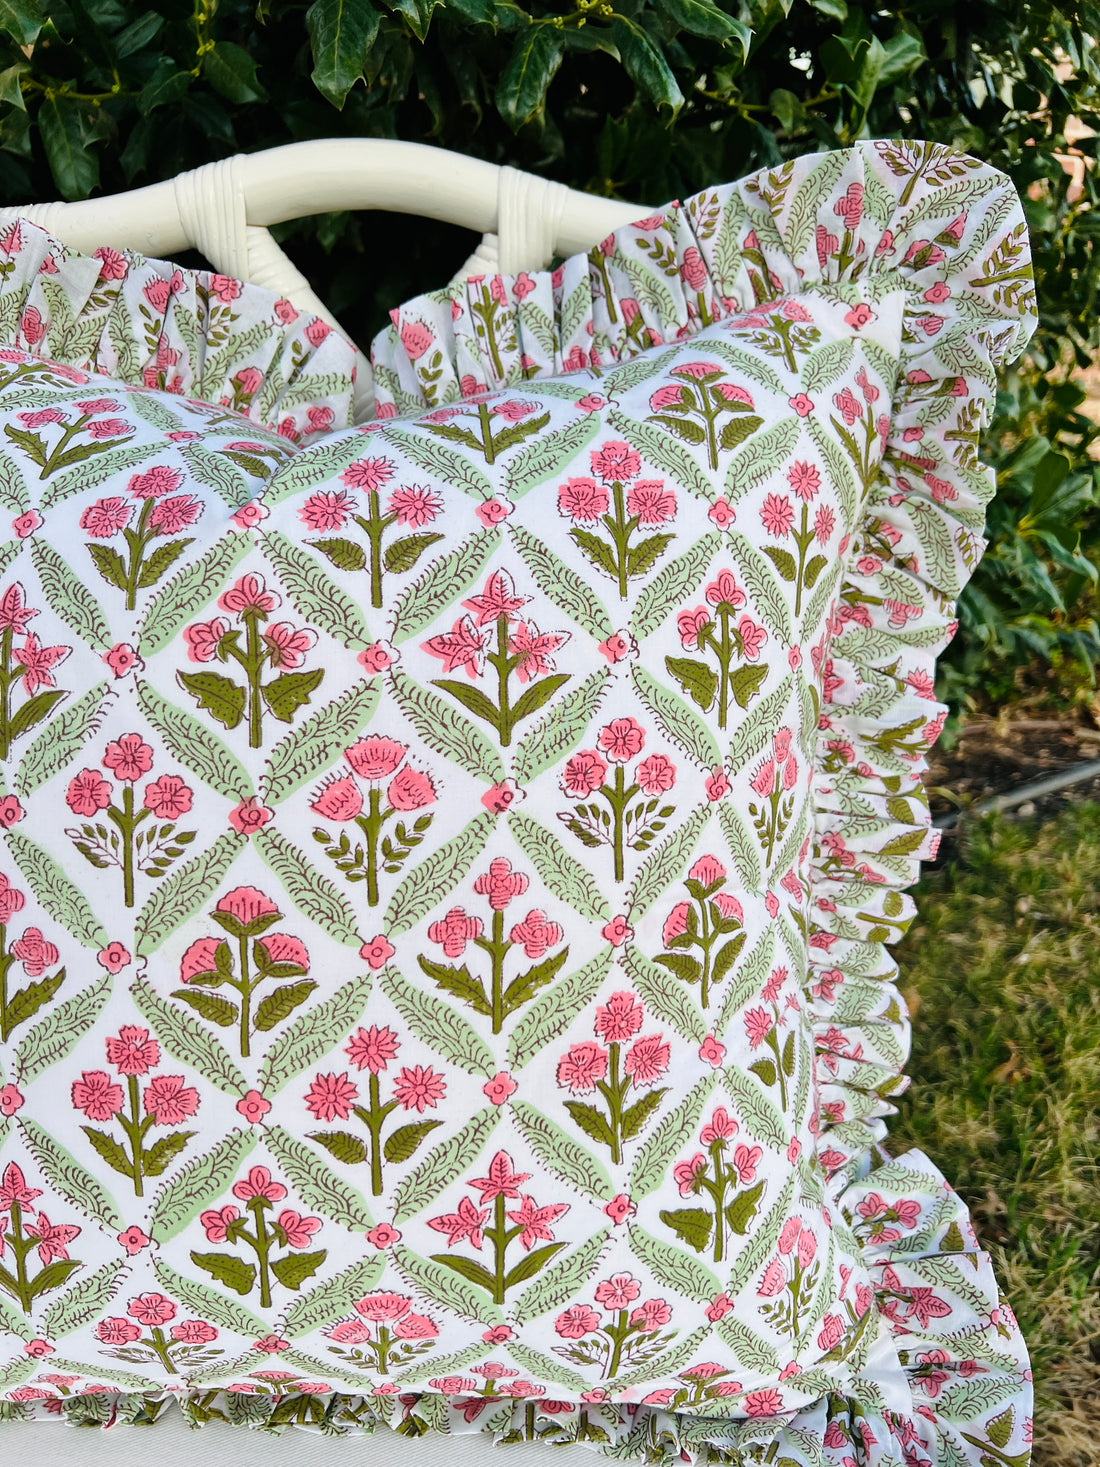 Pink and green floral trellis block print ruffle pillow cover